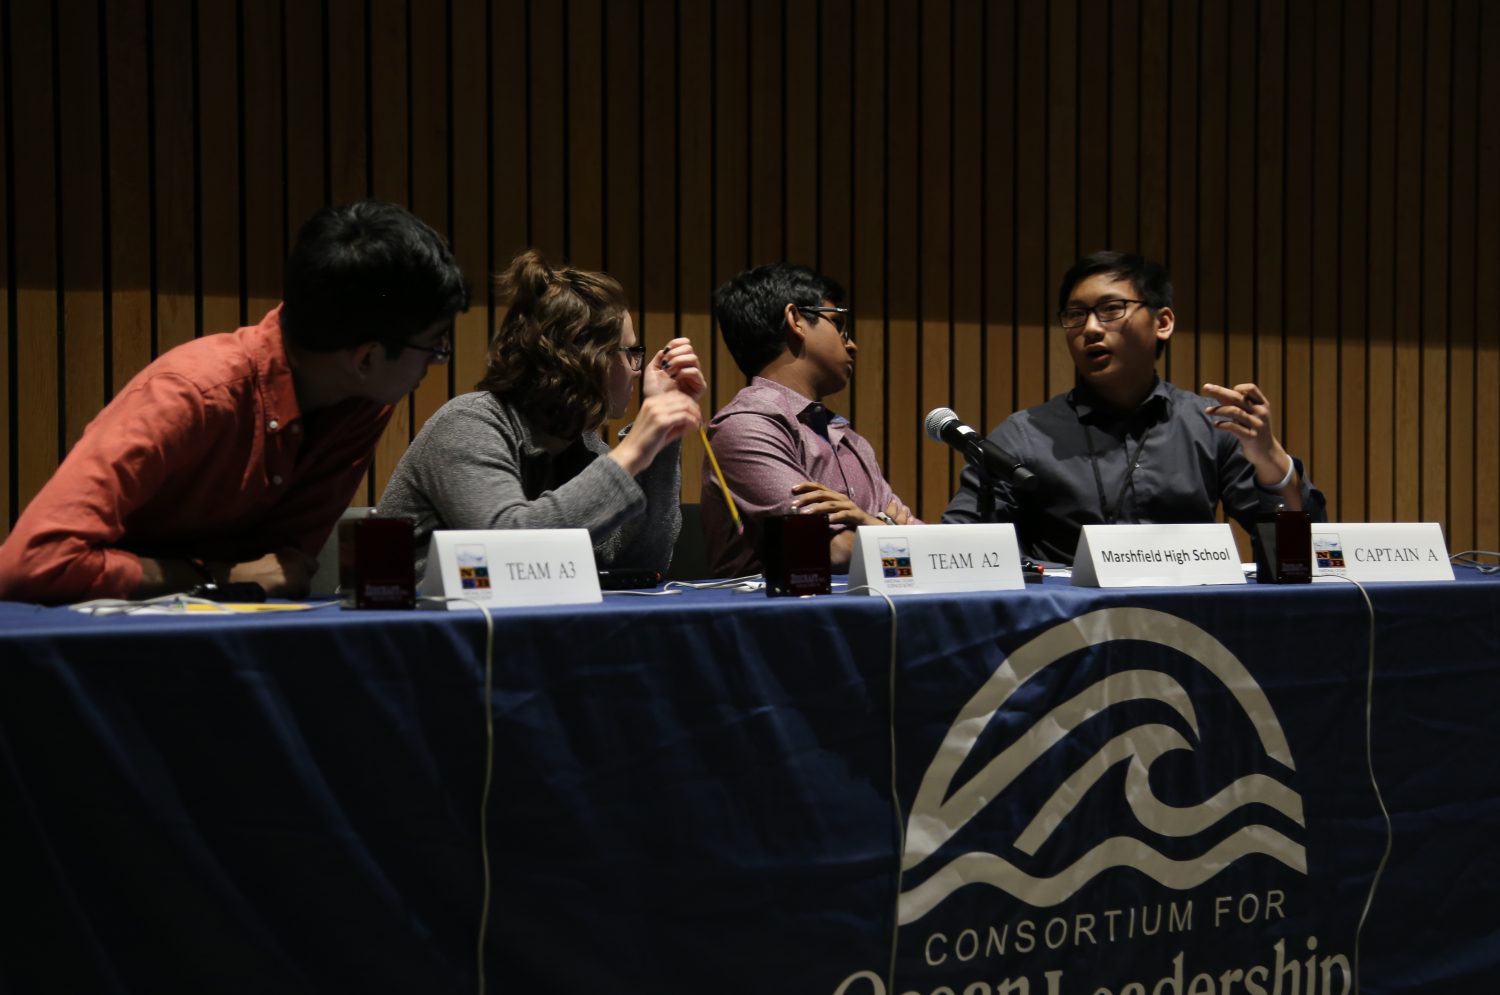 From left: Marshfield High School's Muhammad Abidi, Emma Raasch, Suhaas Bhat, and David Gui discuss an answer at the National Ocean Sciences Bowl national final on April 23.